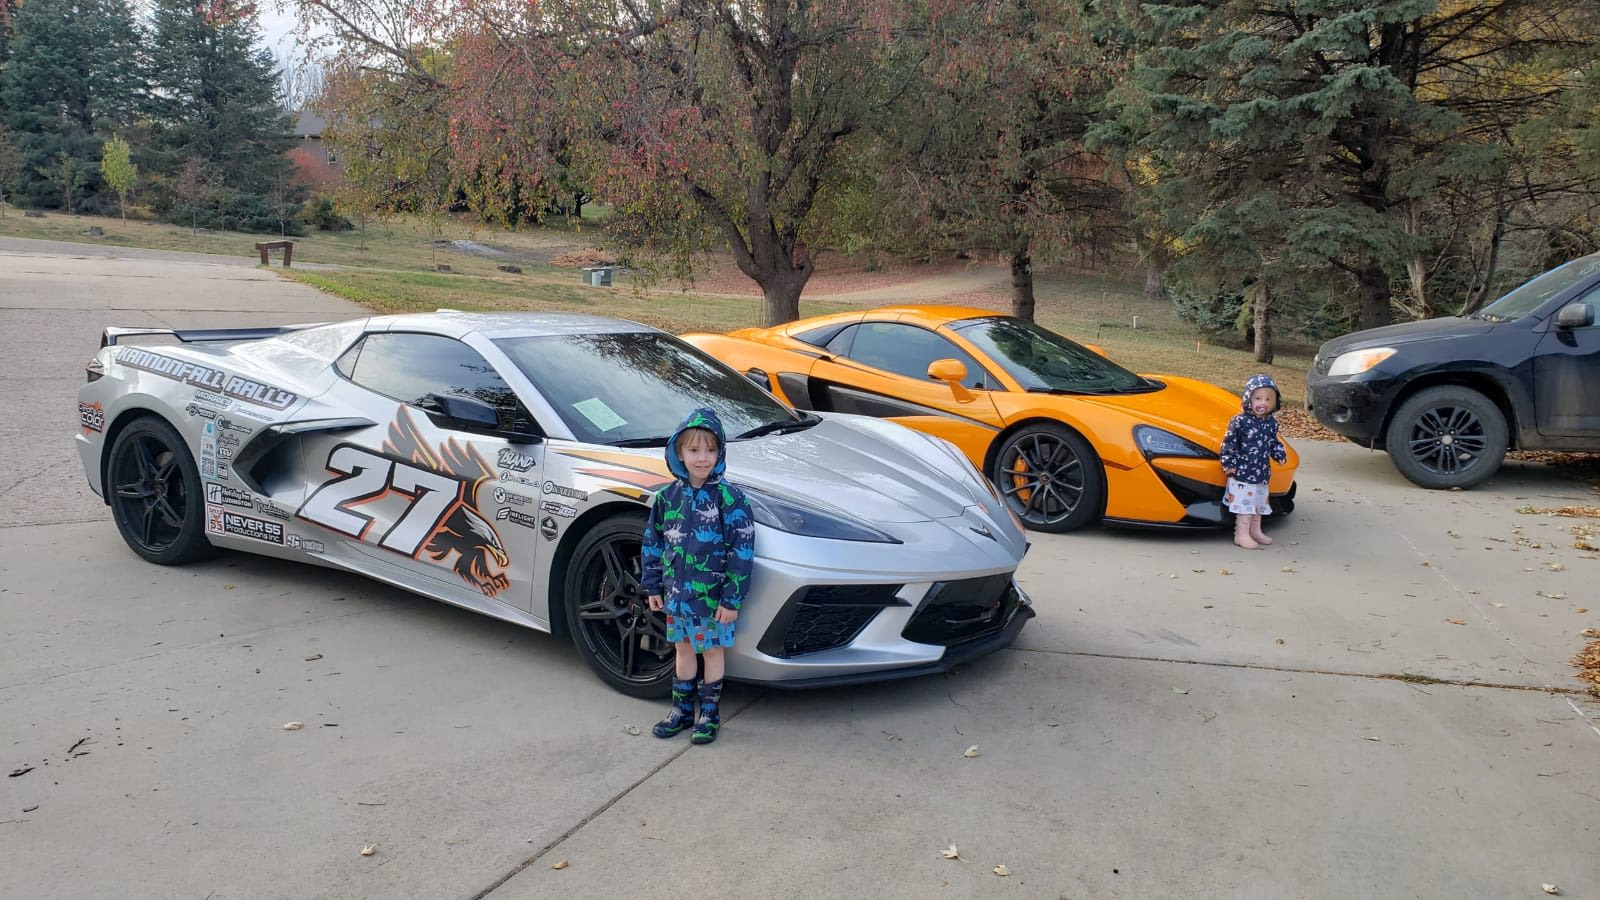 Kids and Cars